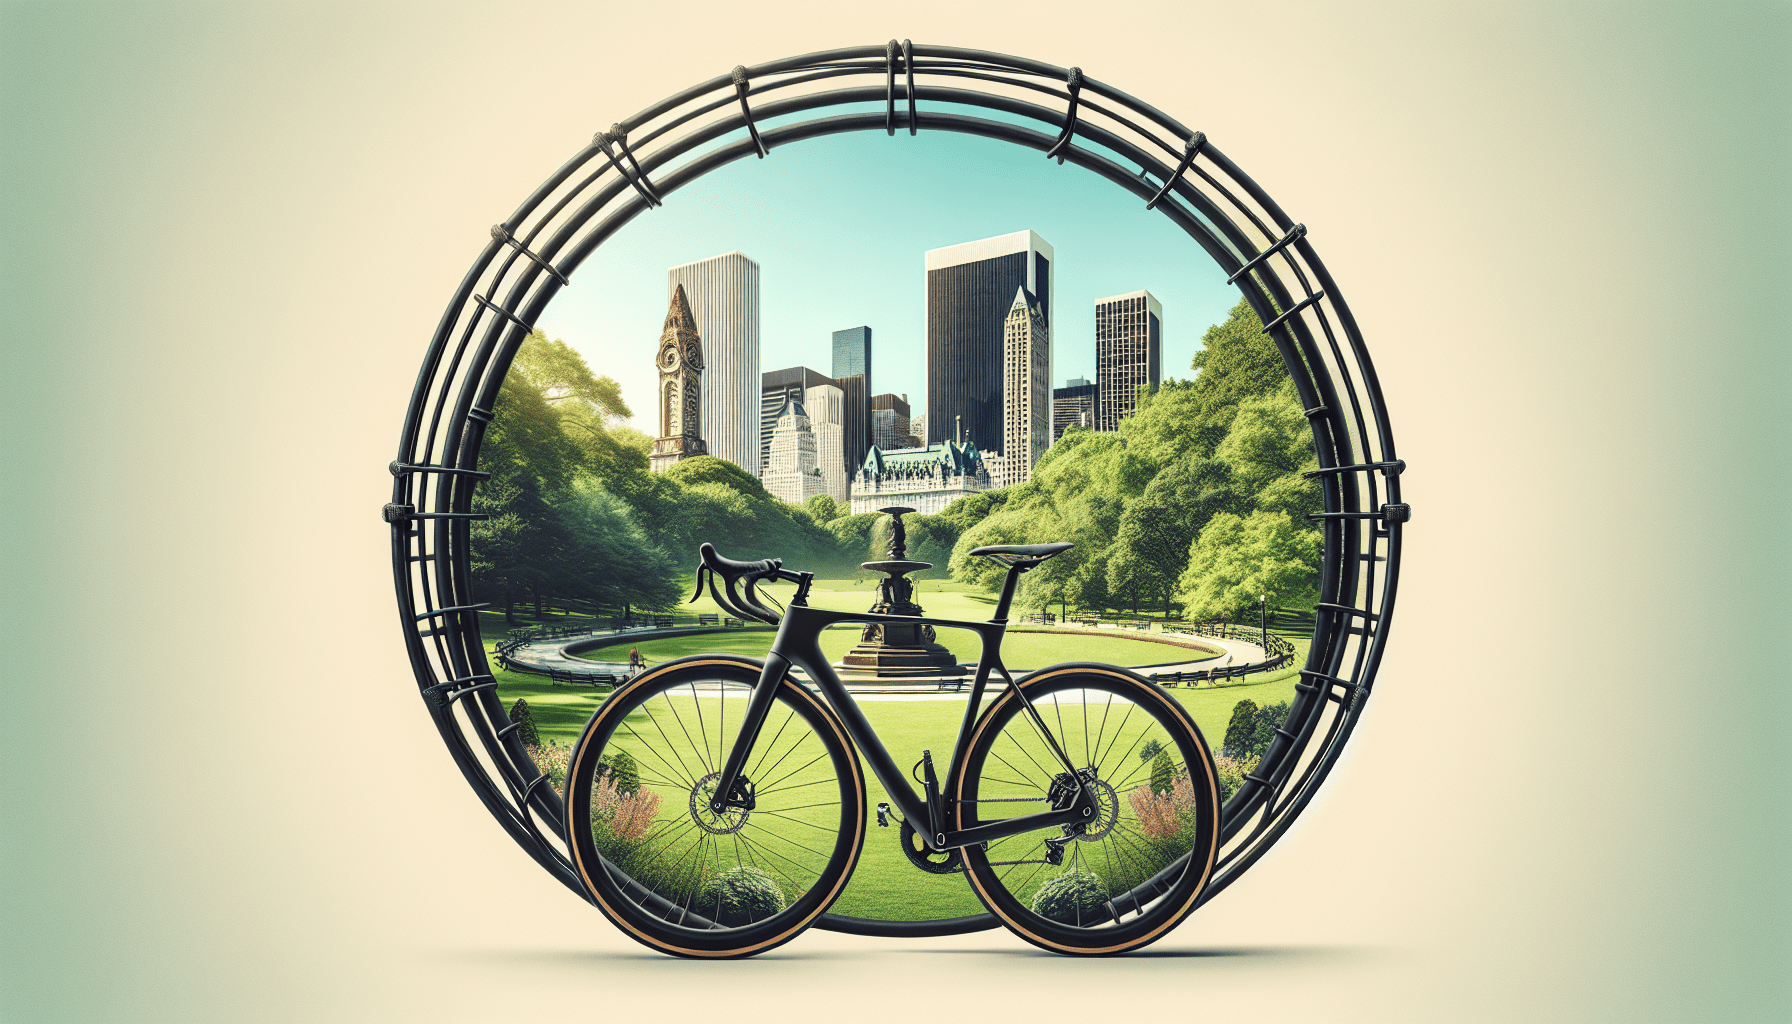 Can You Ride Bikes In Central Park?